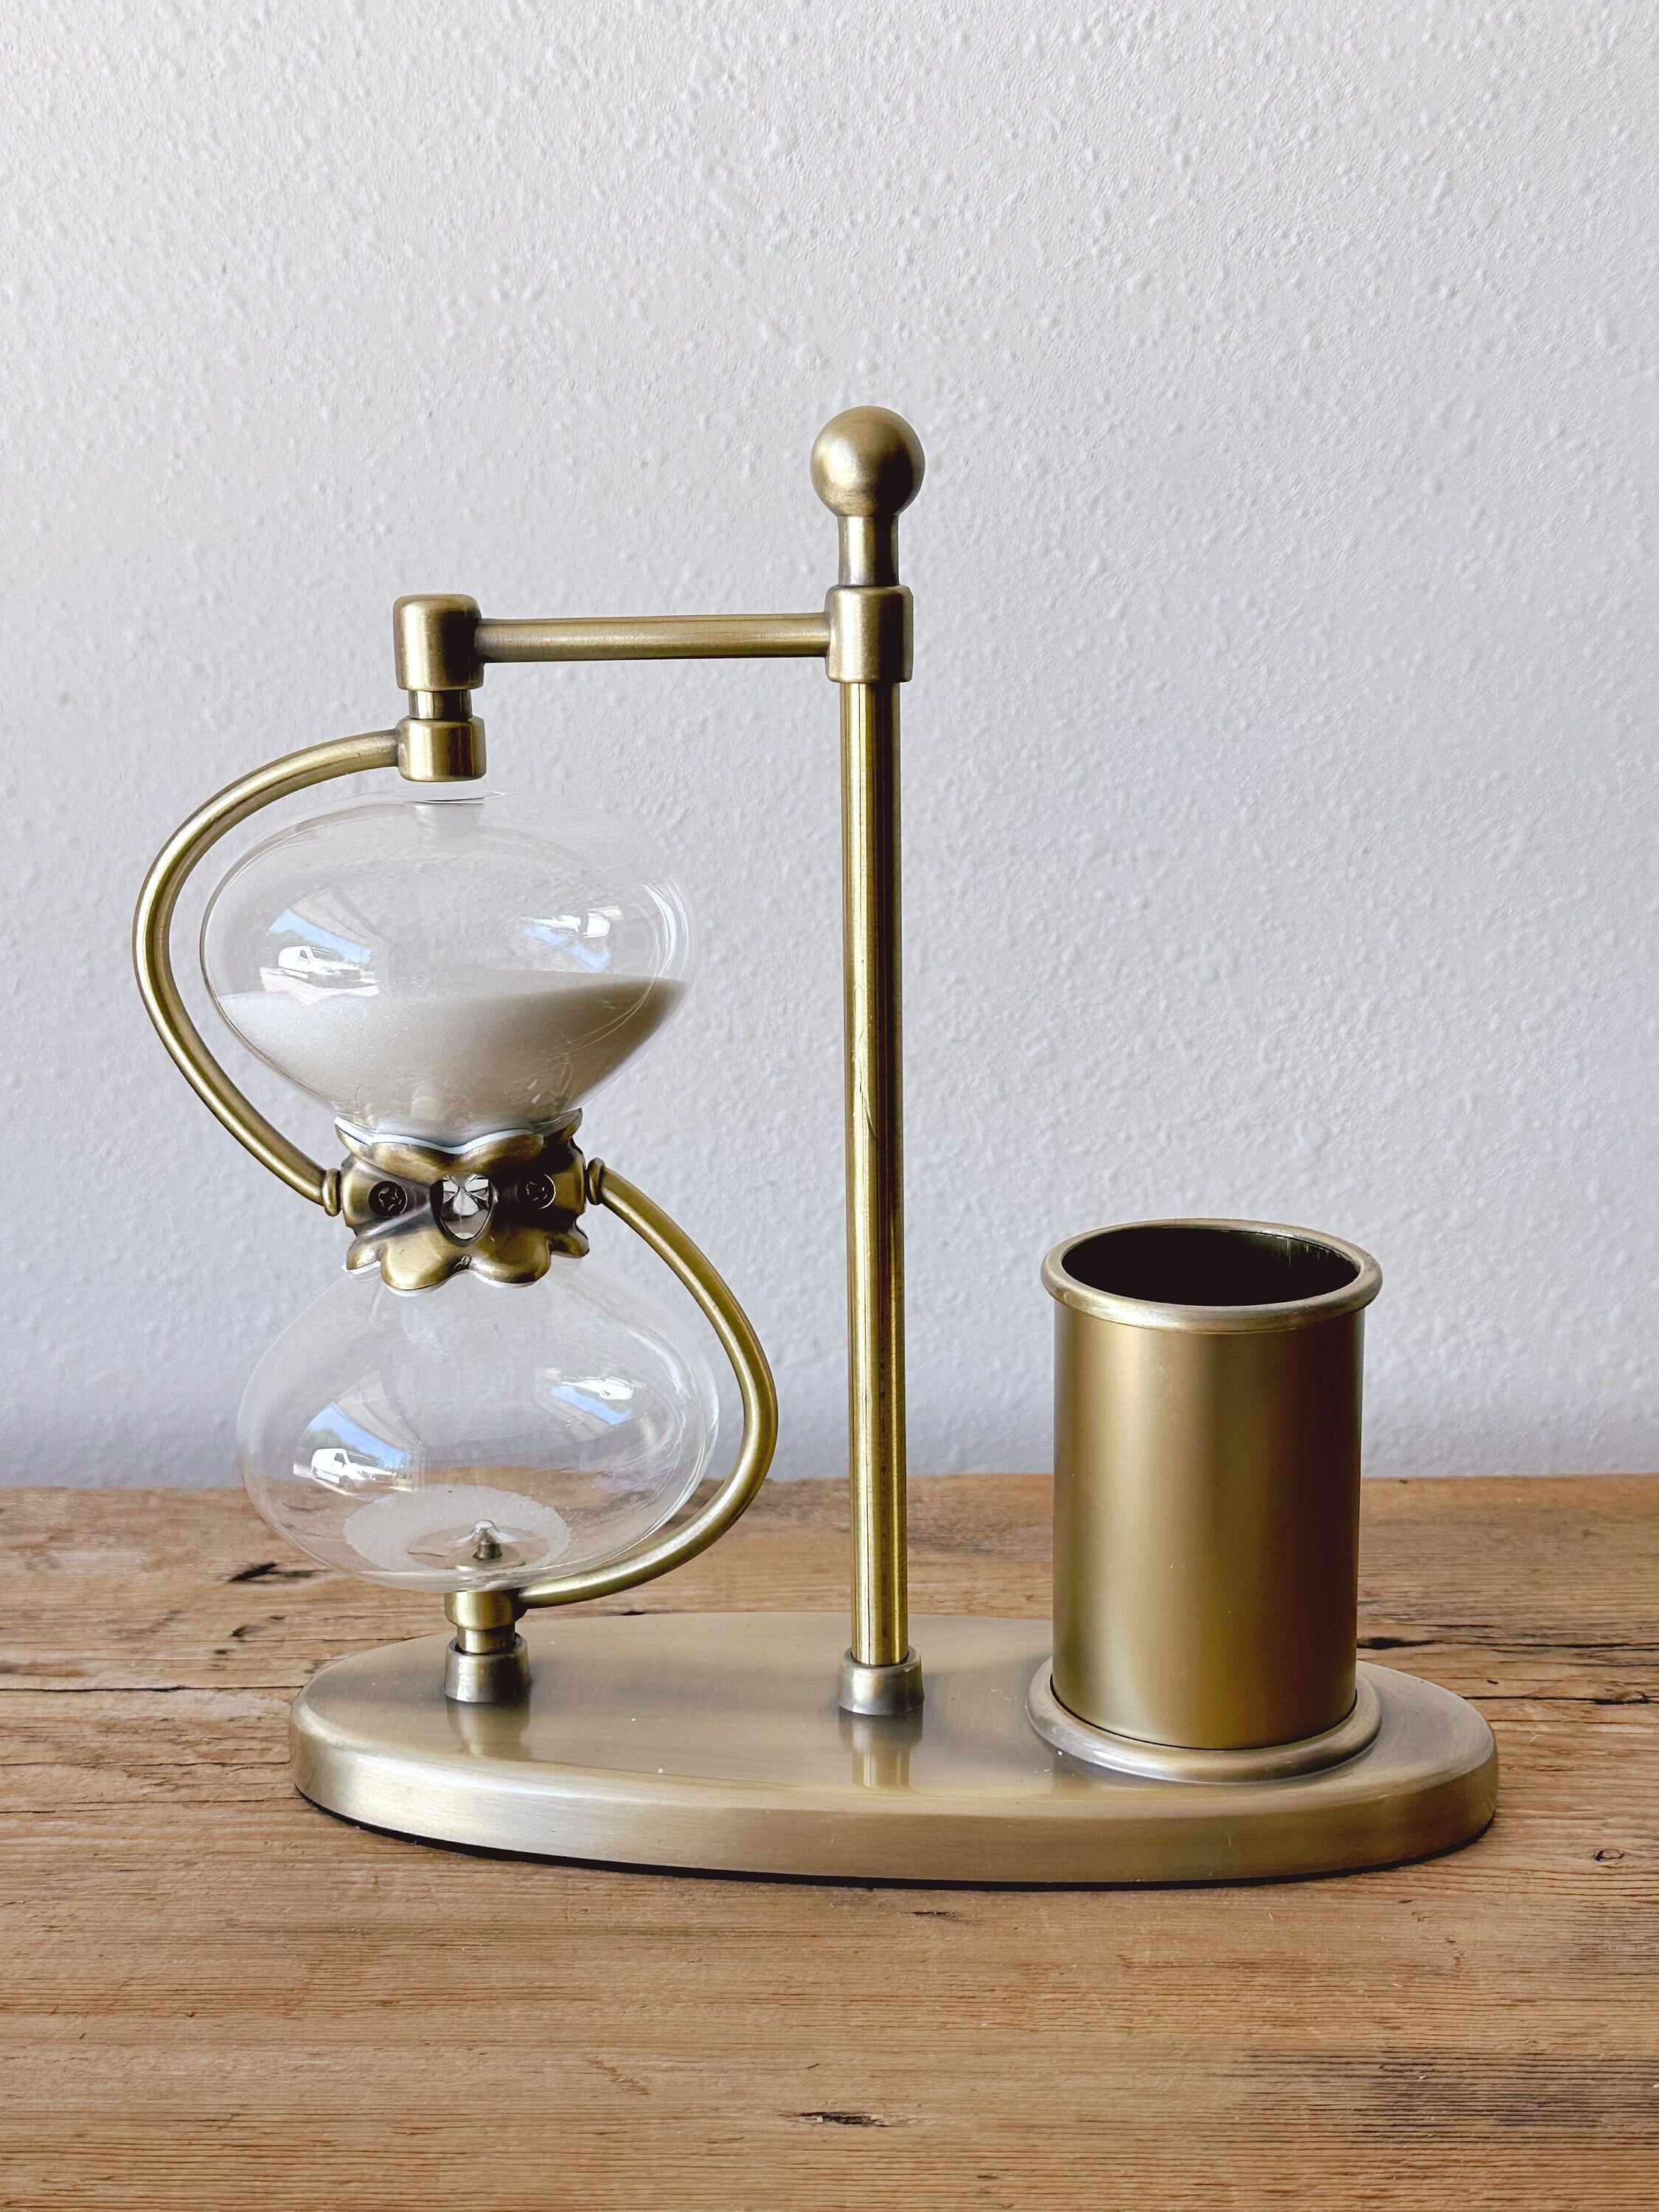 Retro Style Pen Holder with Hourglass Timer in Gold | Modern Desktop Organizer Sand Timer Office Accessory Decor | Graduation Gift